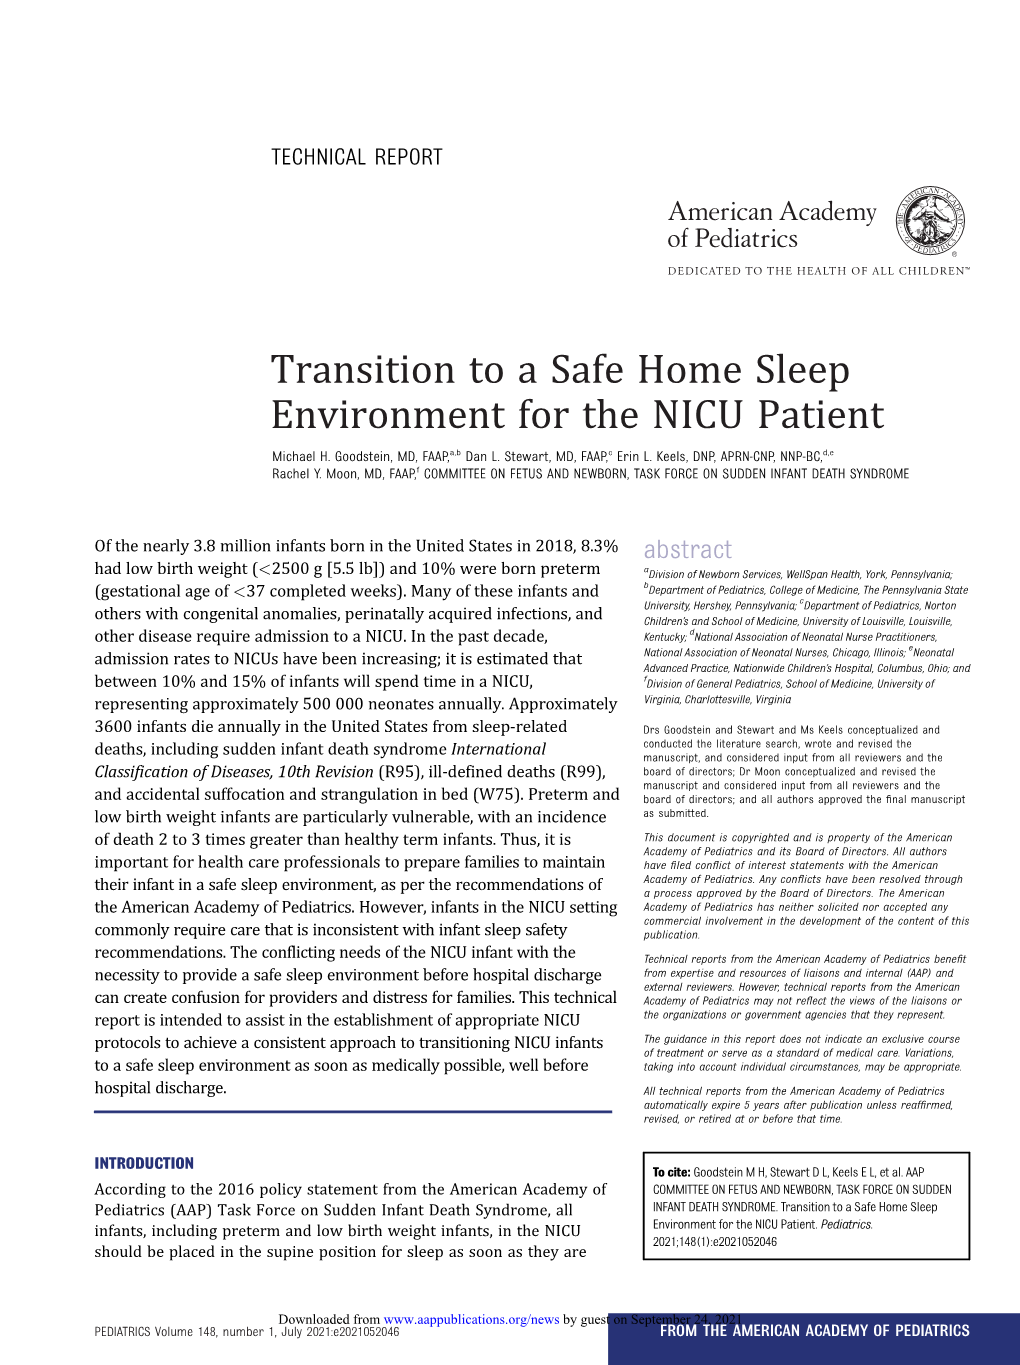 Transition to a Safe Home Sleep Environment for the NICU Patient Michael H